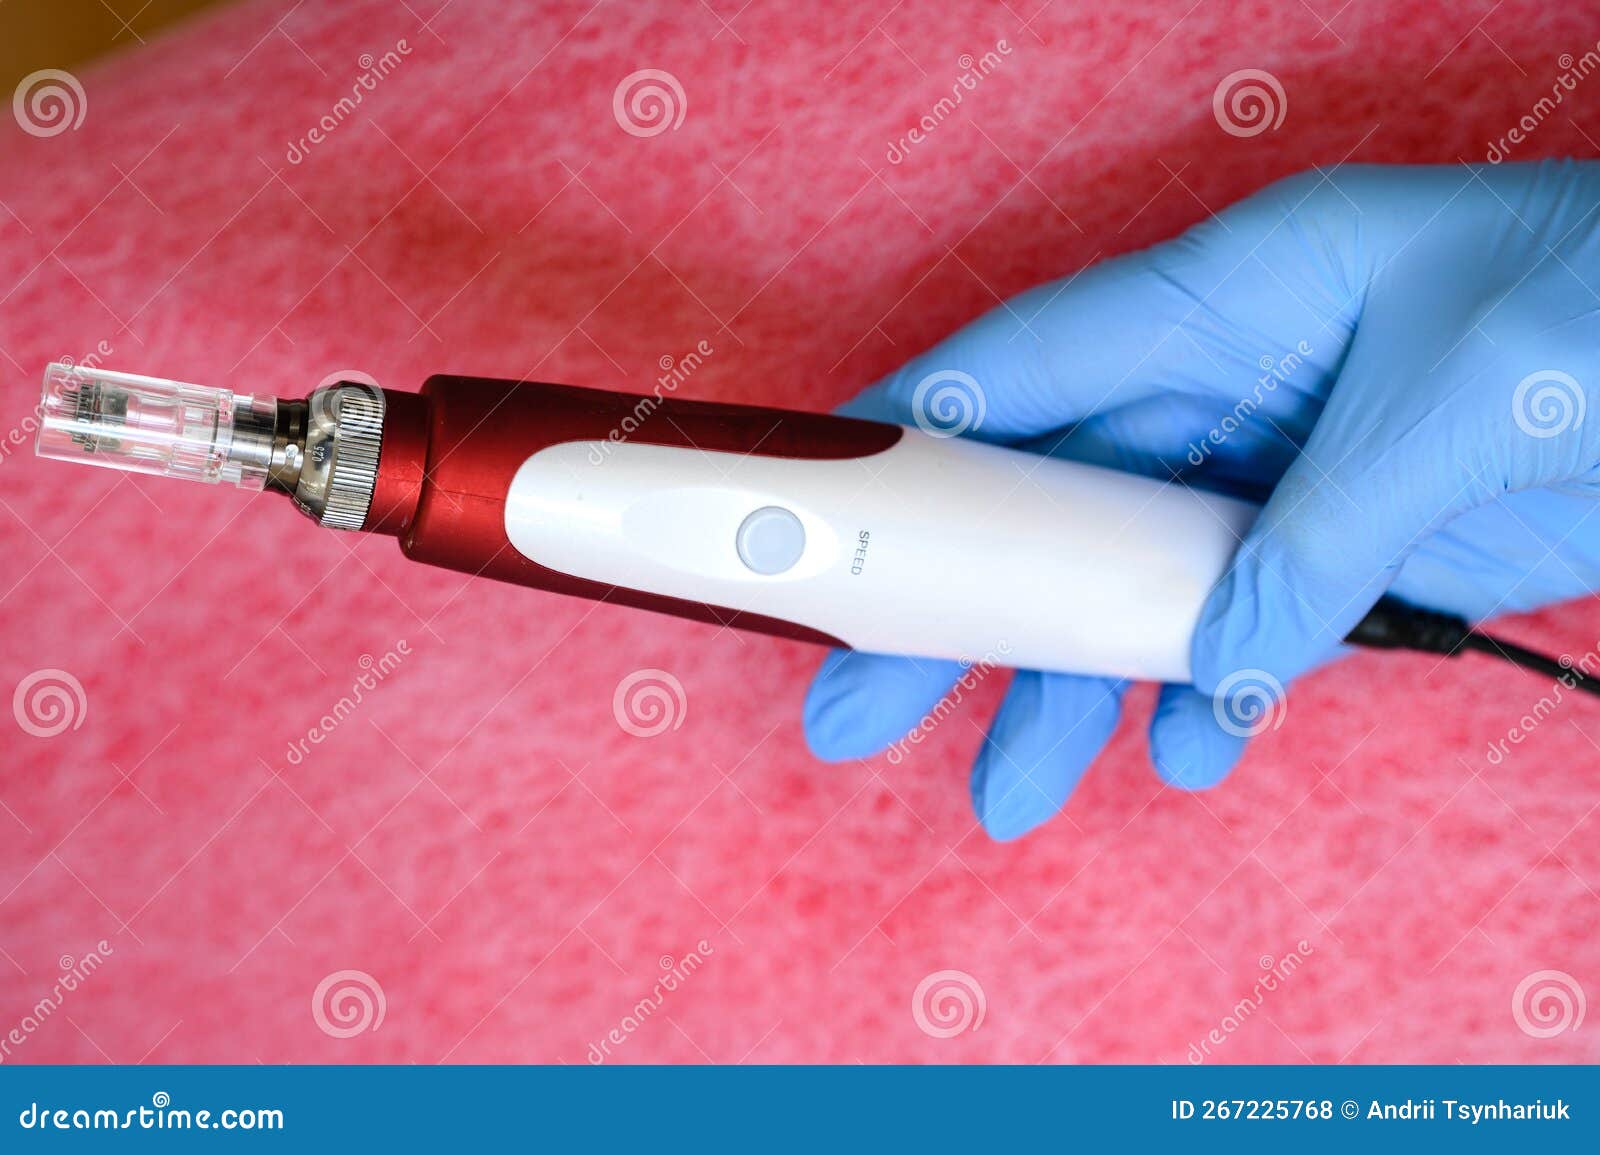 cosmetology device for dermapen mesotherapy close-up.